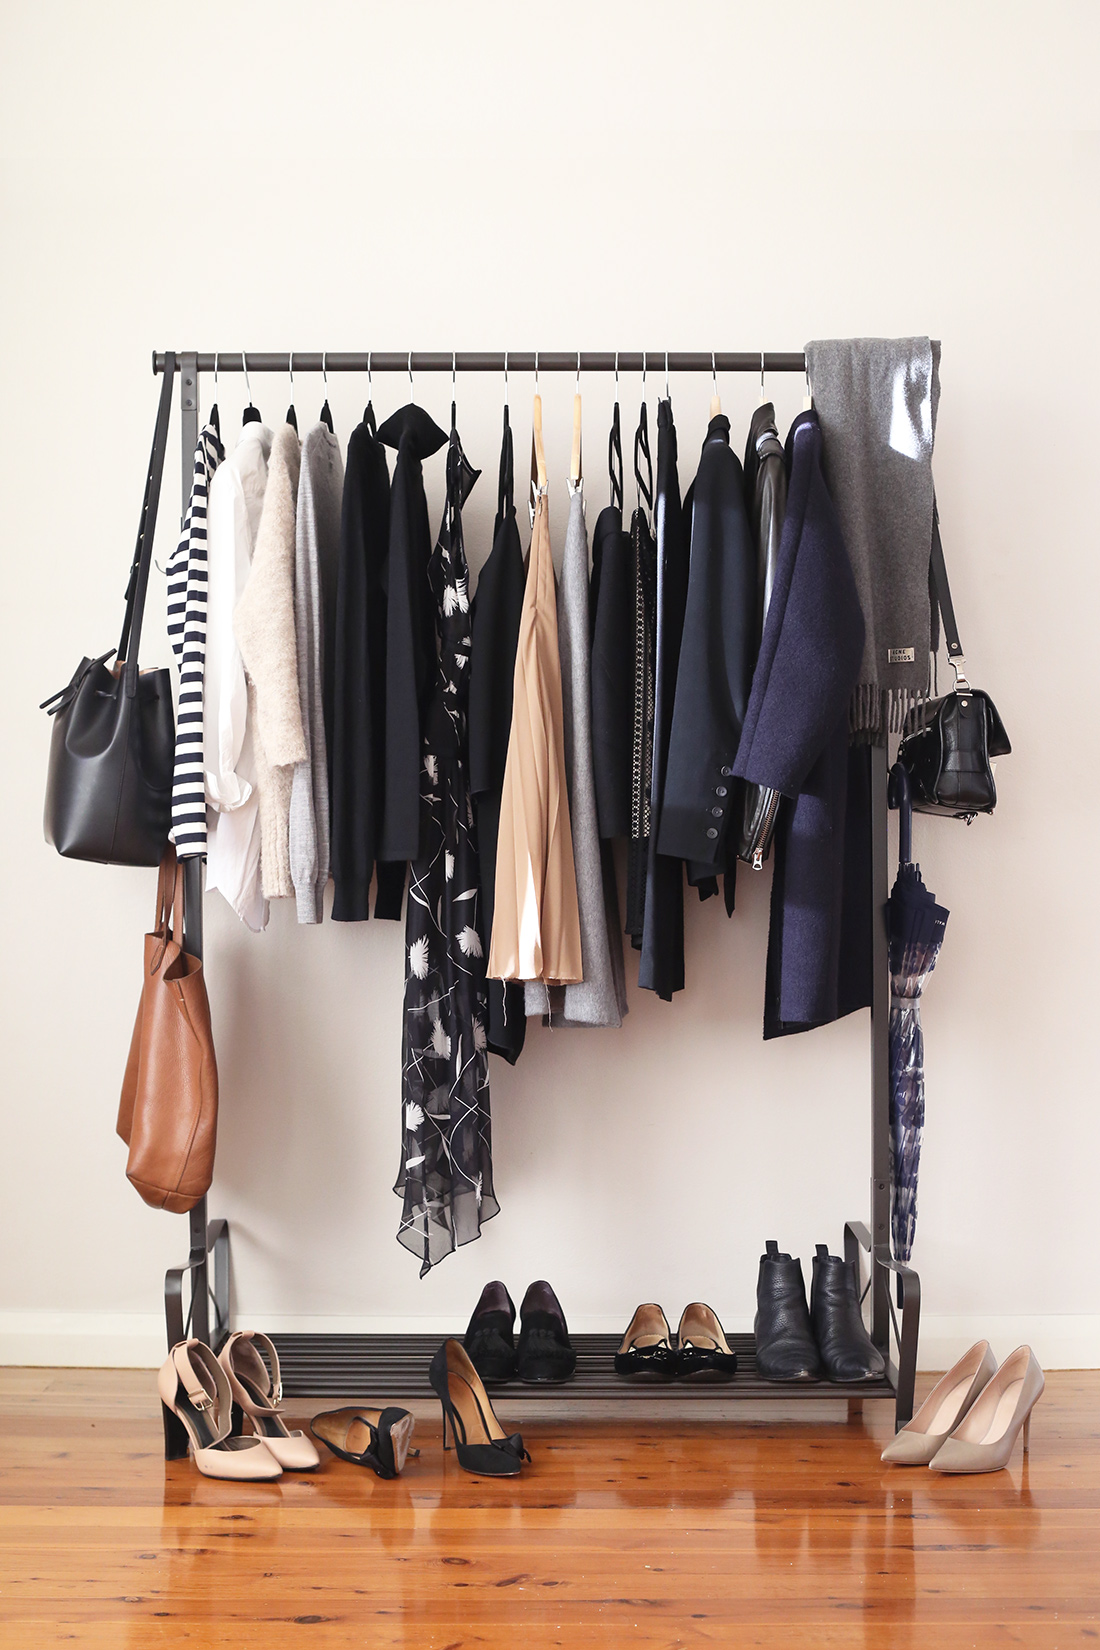 The relaxed winter capsule wardrobe - Mademoiselle